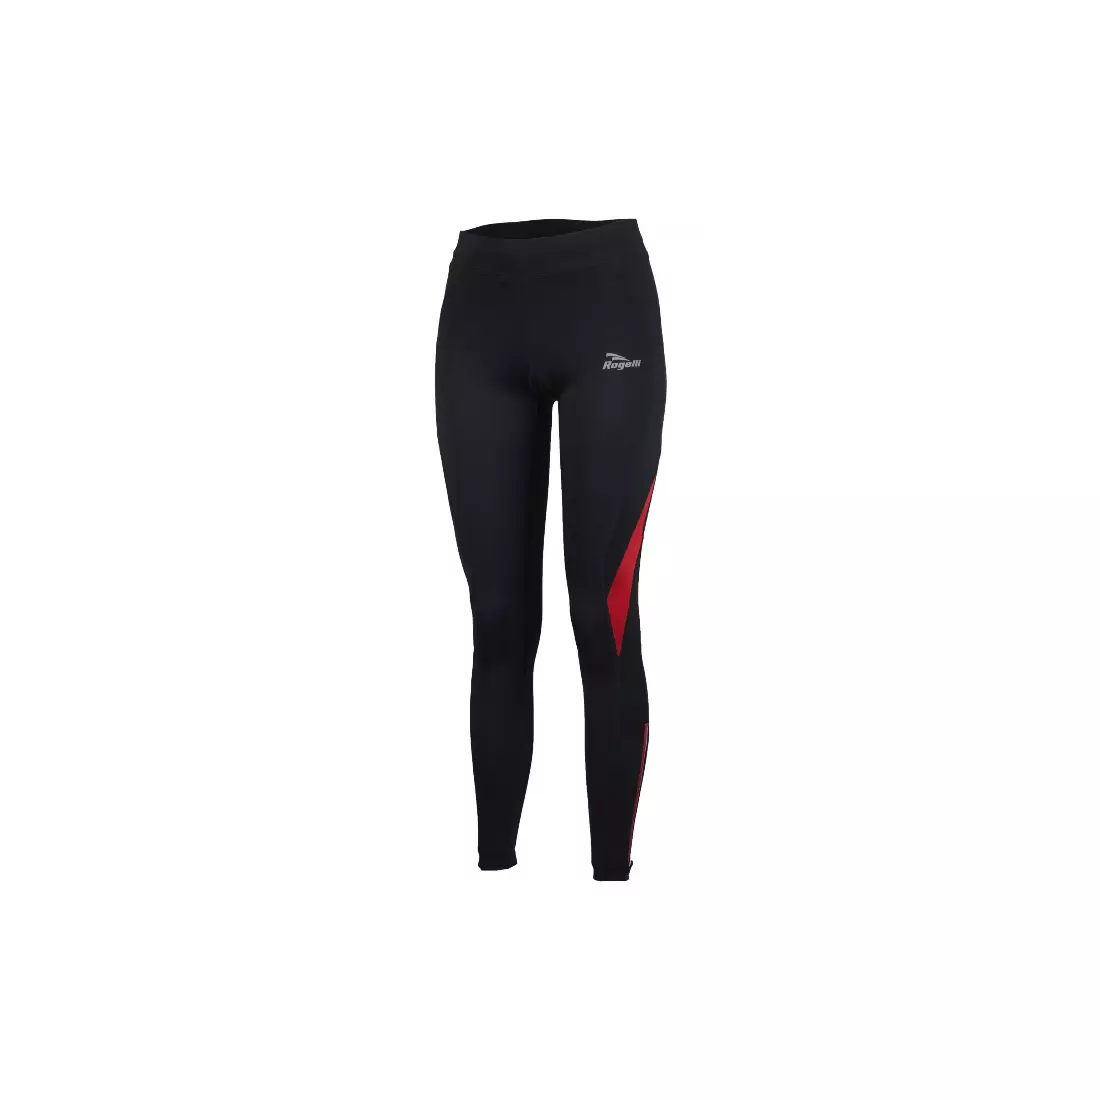 ROGELLI EMNA womens running thermal tights, black-red